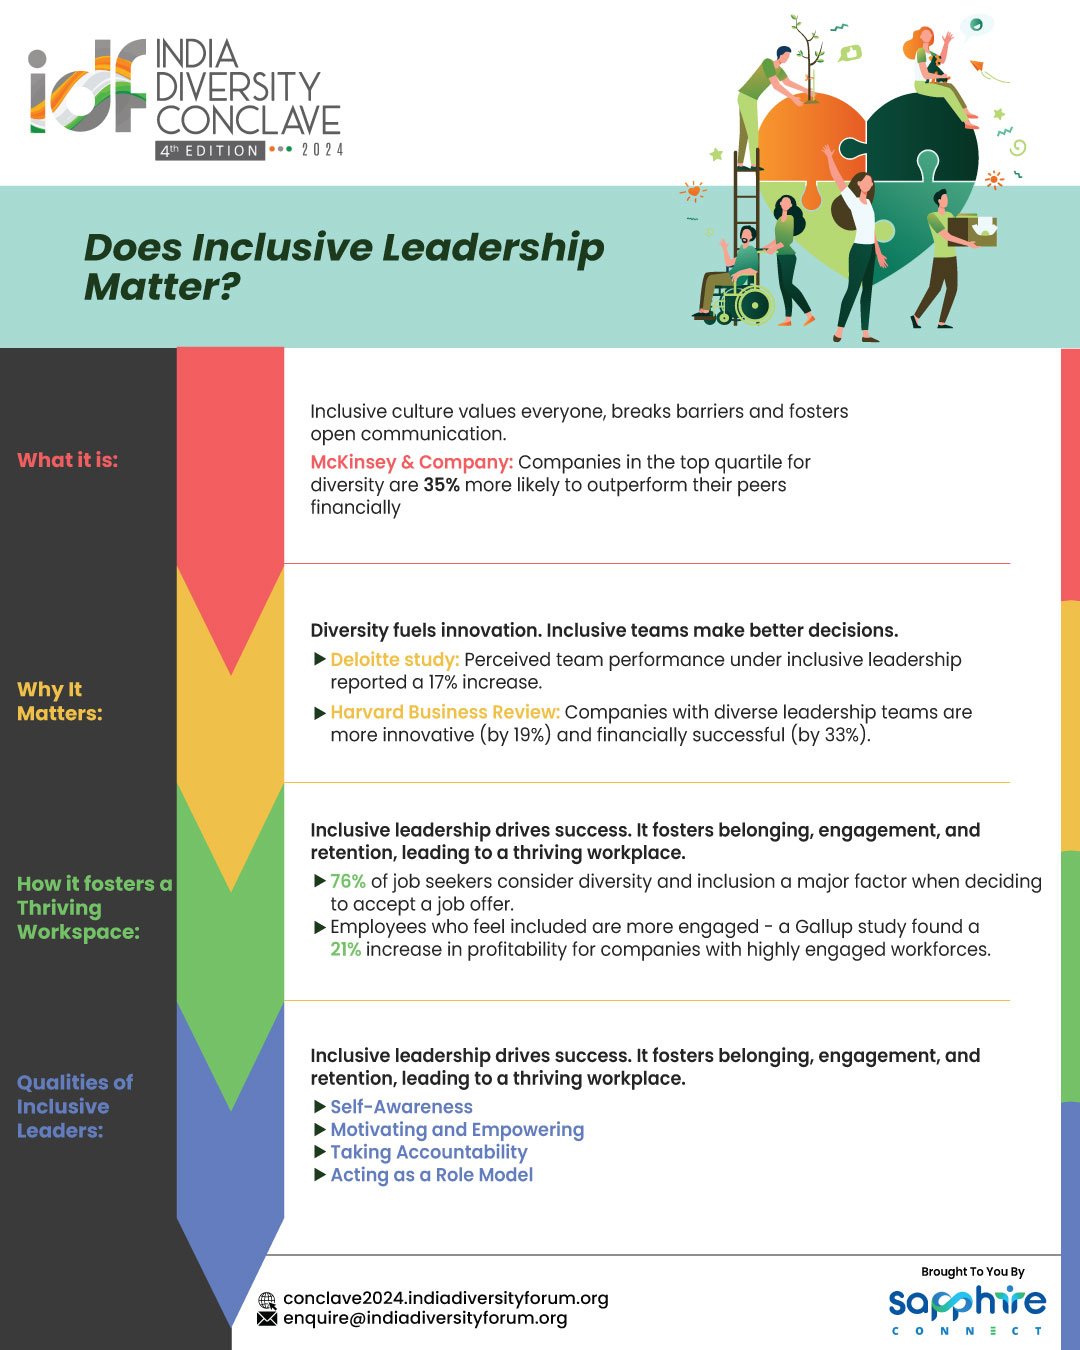 Does Inclusive Leadership matter?